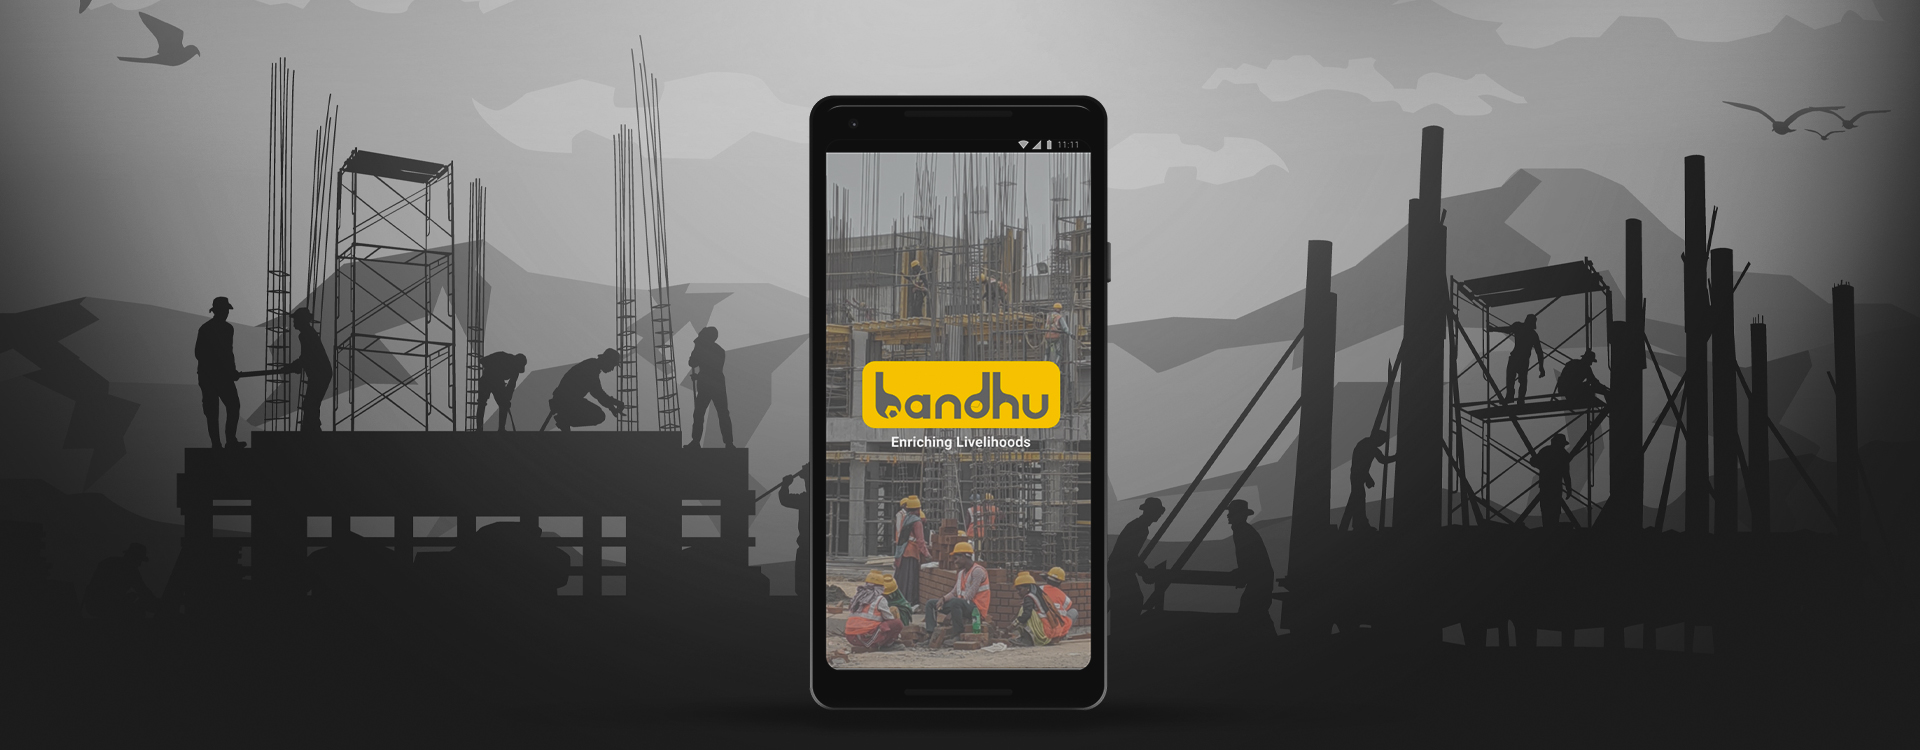 Bandhu app helps low income migrants to find jobs as well as affordable housing .